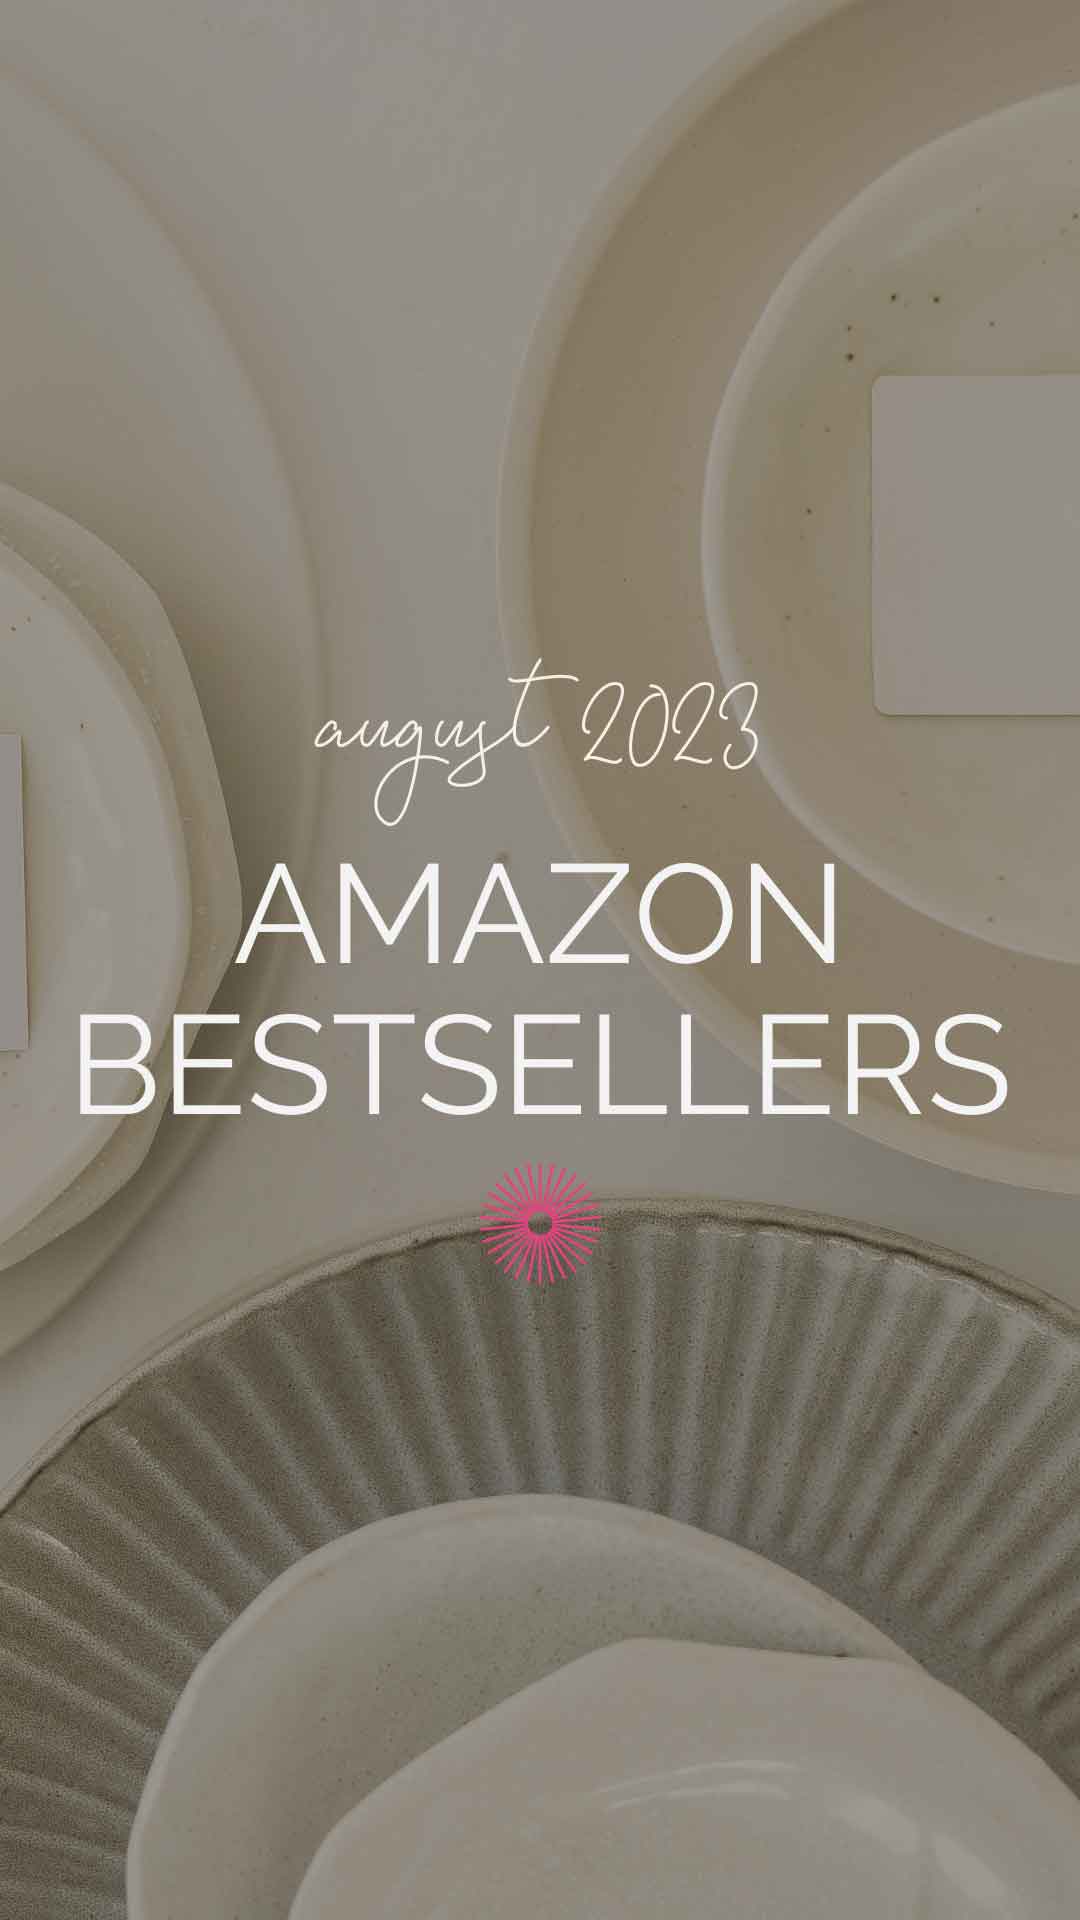 Taupe colored plates with text overlay "August 2023 Amazon Bestsellers"